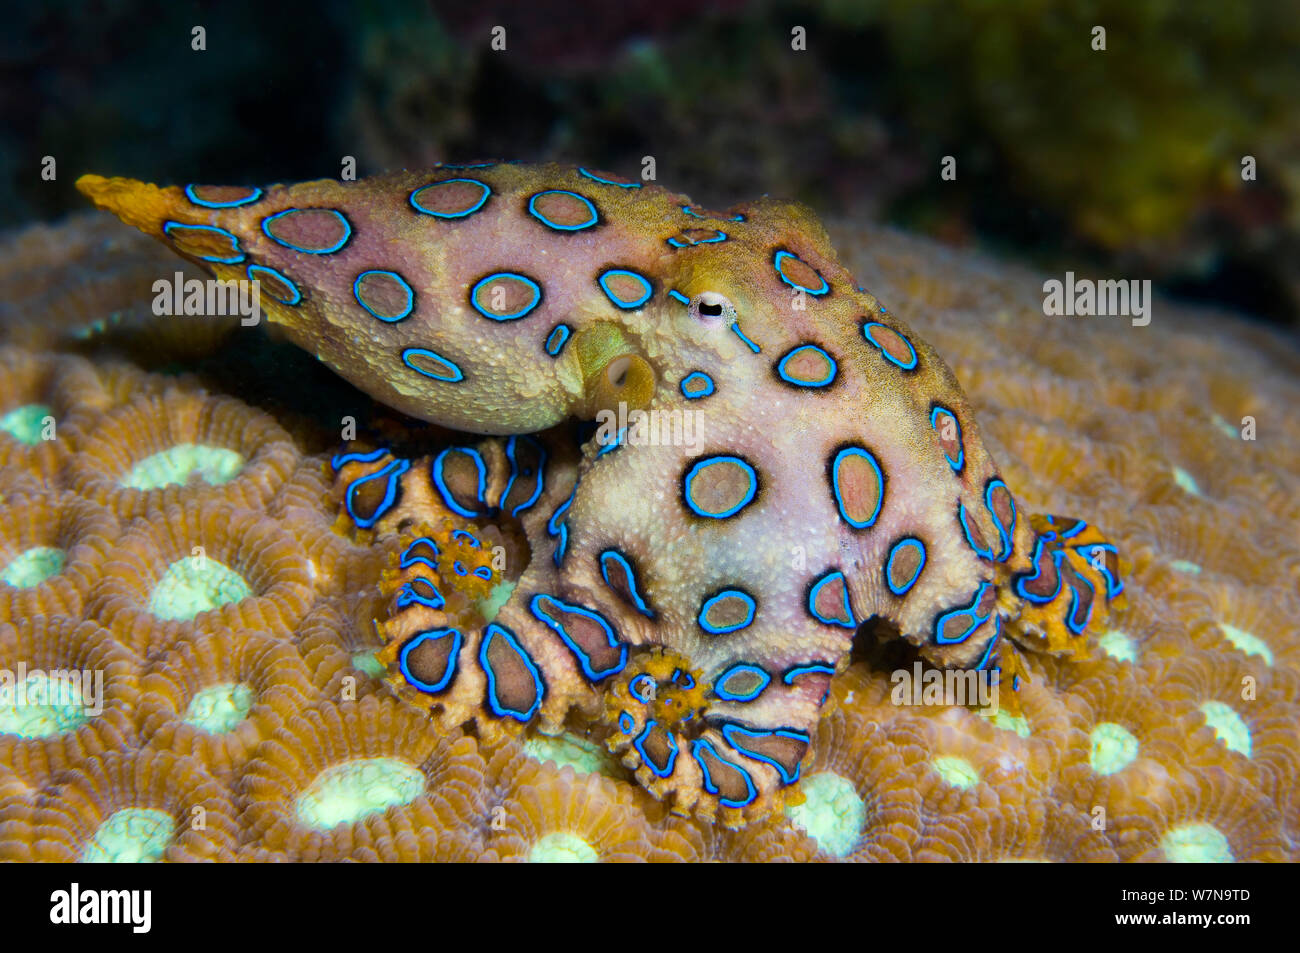 Tropical blue ring octopus (Hapalochlaena lunulata) is small but has one of the most venomous creatures in the ocean, its bite injects a neurotoxin that paralyses its victim. It flashes its blue rings to warn as a warning. Kapalai Island, Sulu Sea, Sabah, Borneo, Malaysia. Stock Photo